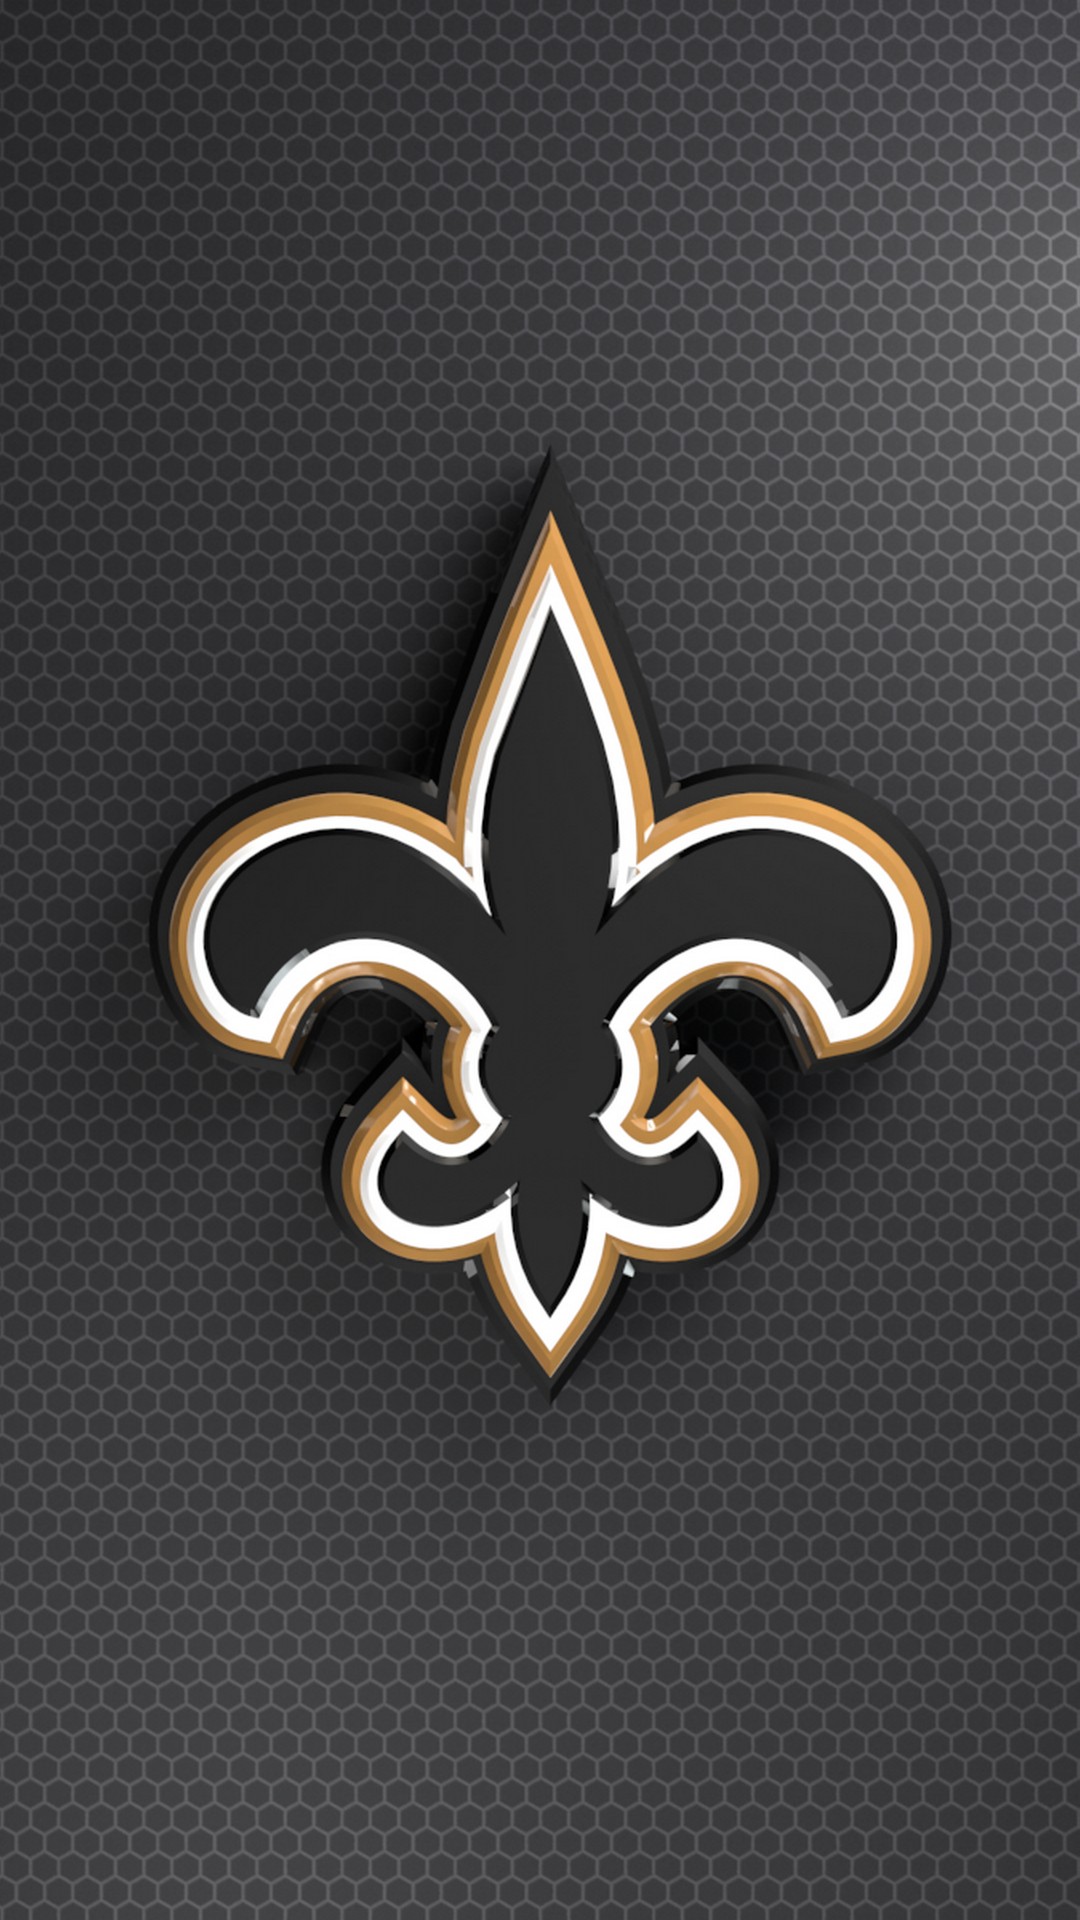 New Orleans Saints iPhone Wallpaper New with high-resolution 1080x1920 pixel. Donwload and set as wallpaper for your iPhone X, iPhone XS home screen backgrounds, XS Max, XR, iPhone8 lock screen wallpaper, iPhone 7, 6, SE and other mobile devices